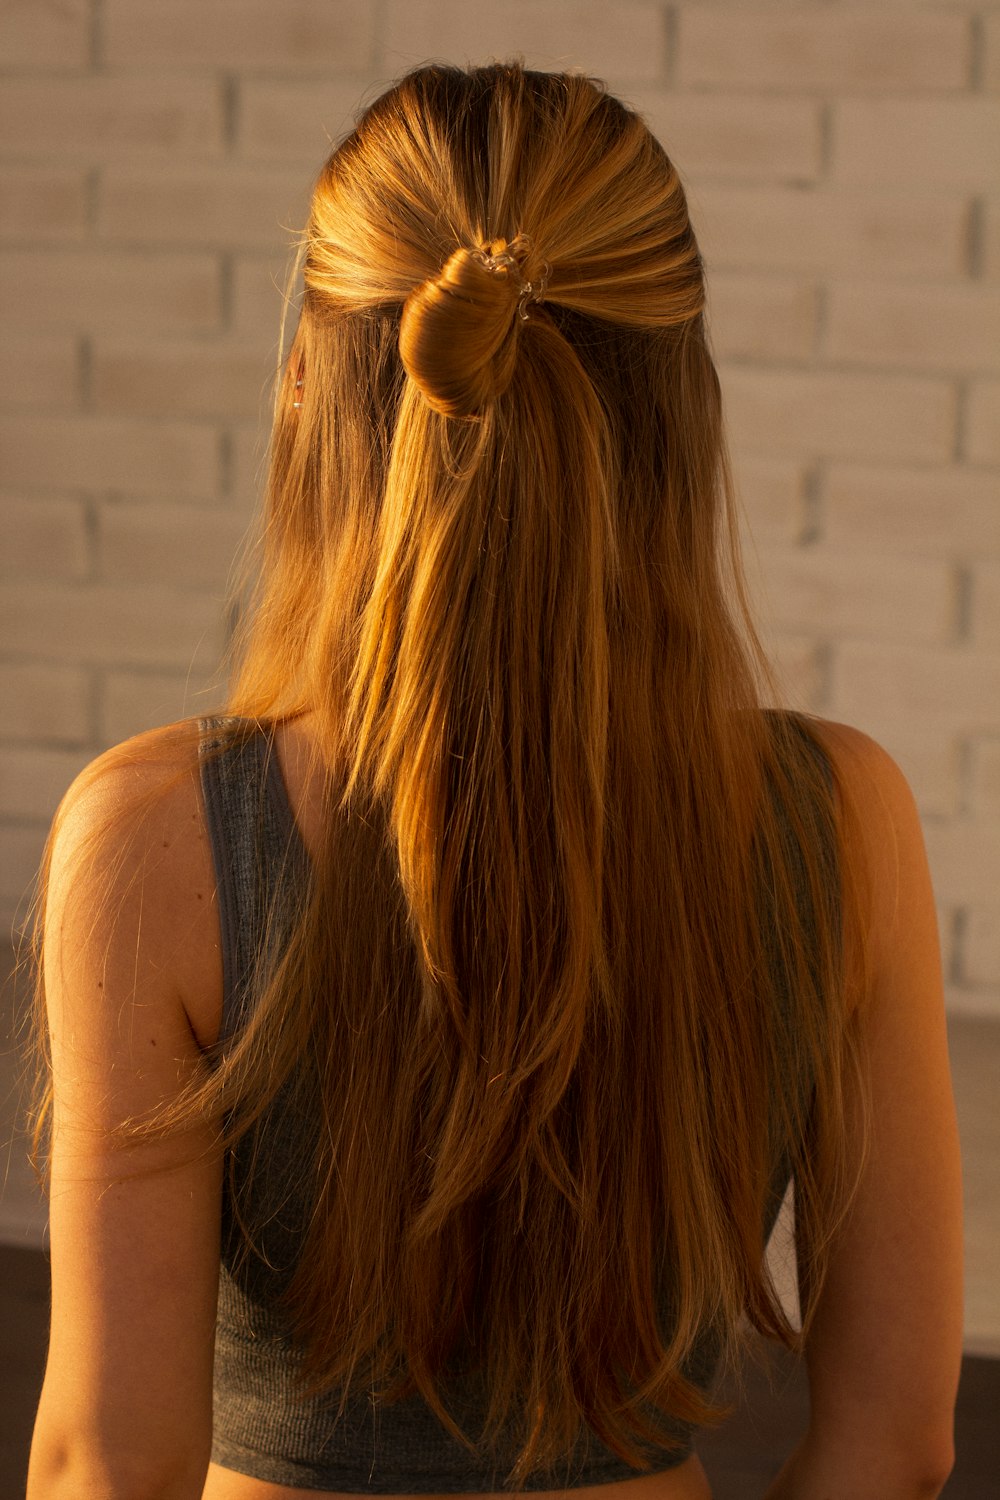 Hair Back Pictures | Download Free Images on Unsplash